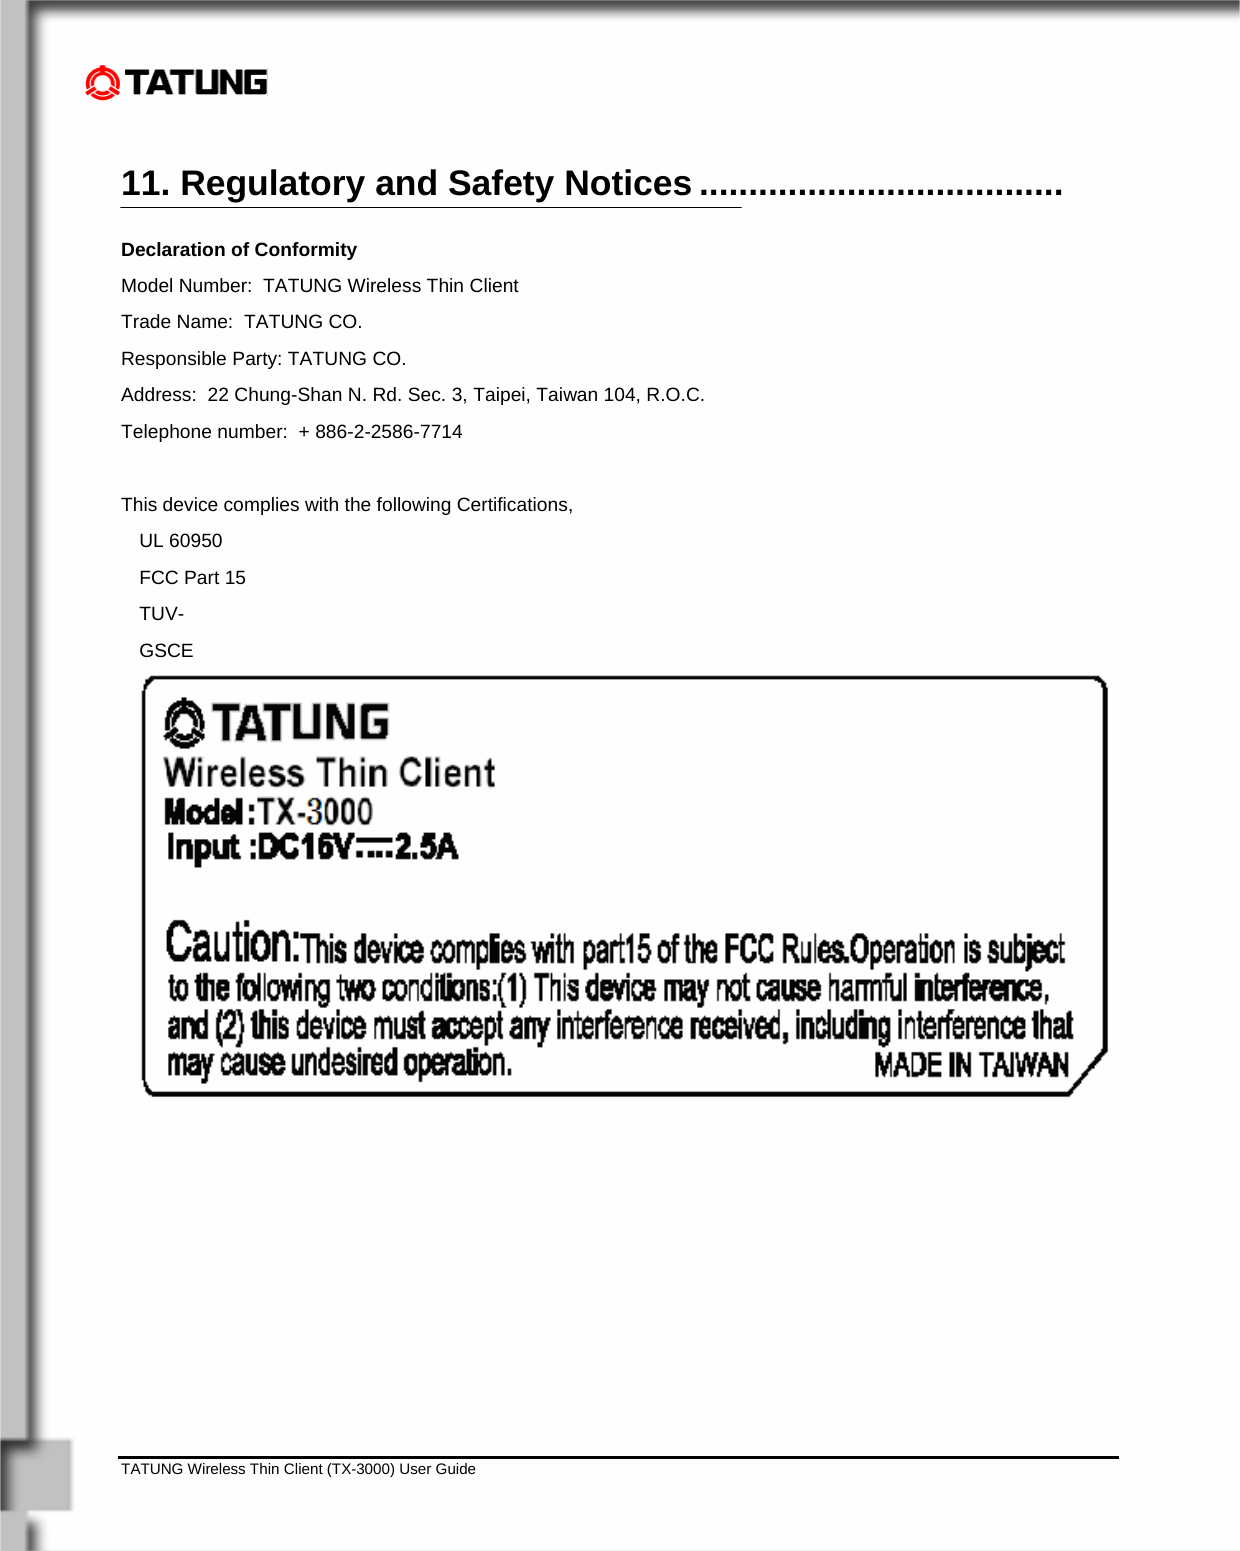    TATUNG Wireless Thin Client (TX-3000) User Guide                                                                                                                              11. Regulatory and Safety Notices ..................................... Declaration of Conformity Model Number:  TATUNG Wireless Thin Client Trade Name:  TATUNG CO. Responsible Party: TATUNG CO. Address:  22 Chung-Shan N. Rd. Sec. 3, Taipei, Taiwan 104, R.O.C. Telephone number:  + 886-2-2586-7714  This device complies with the following Certifications,    UL 60950 FCC Part 15  TUV-GSCE    